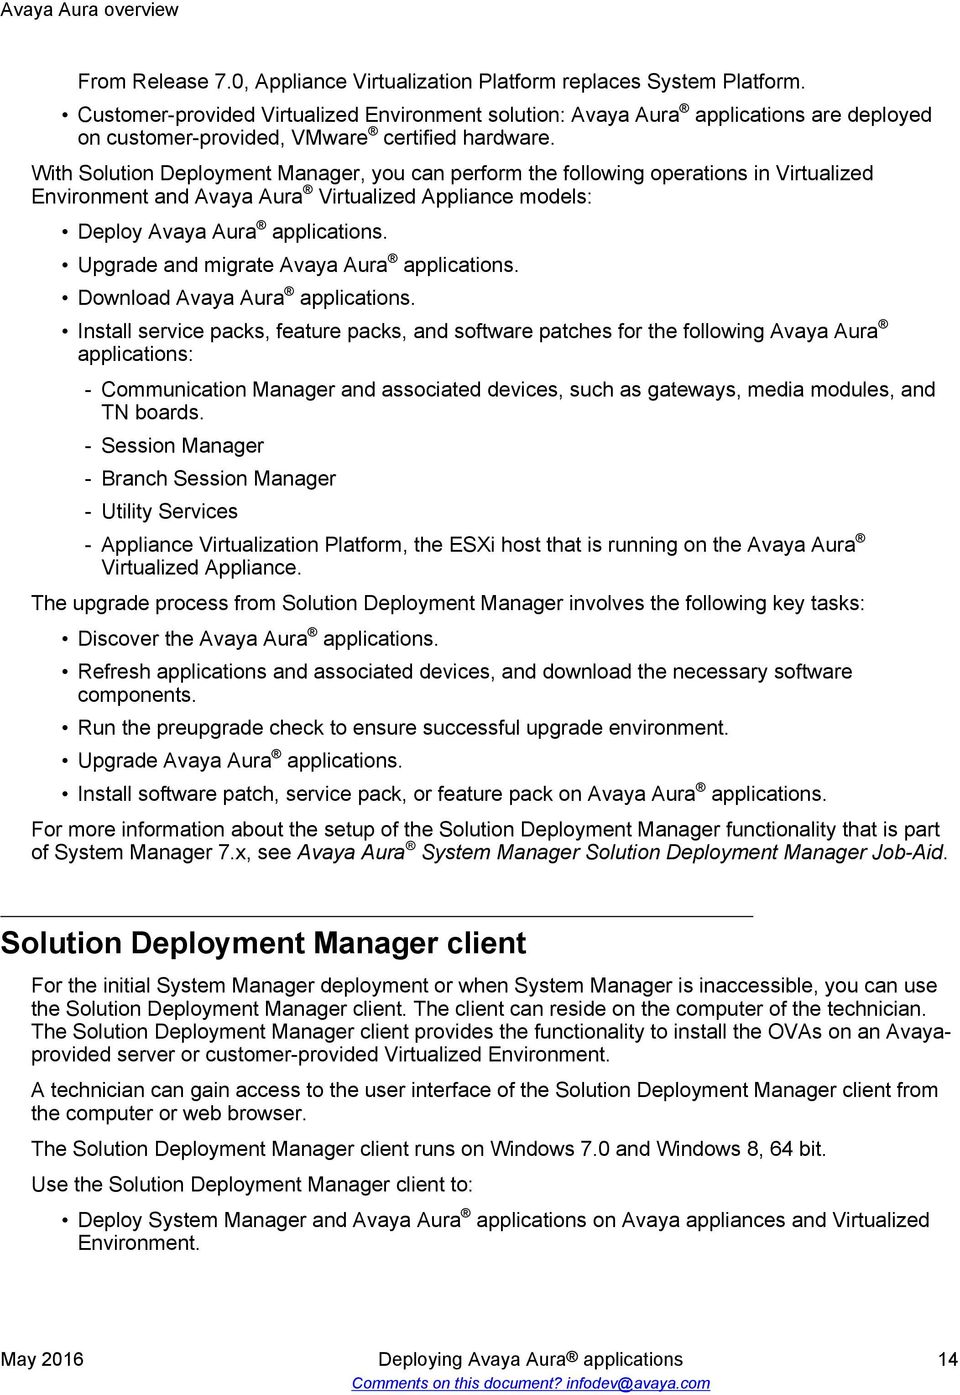 With Solution Deployment Manager, you can perform the following operations in Virtualized Environment and Avaya Aura Virtualized Appliance models: Deploy Avaya Aura applications.